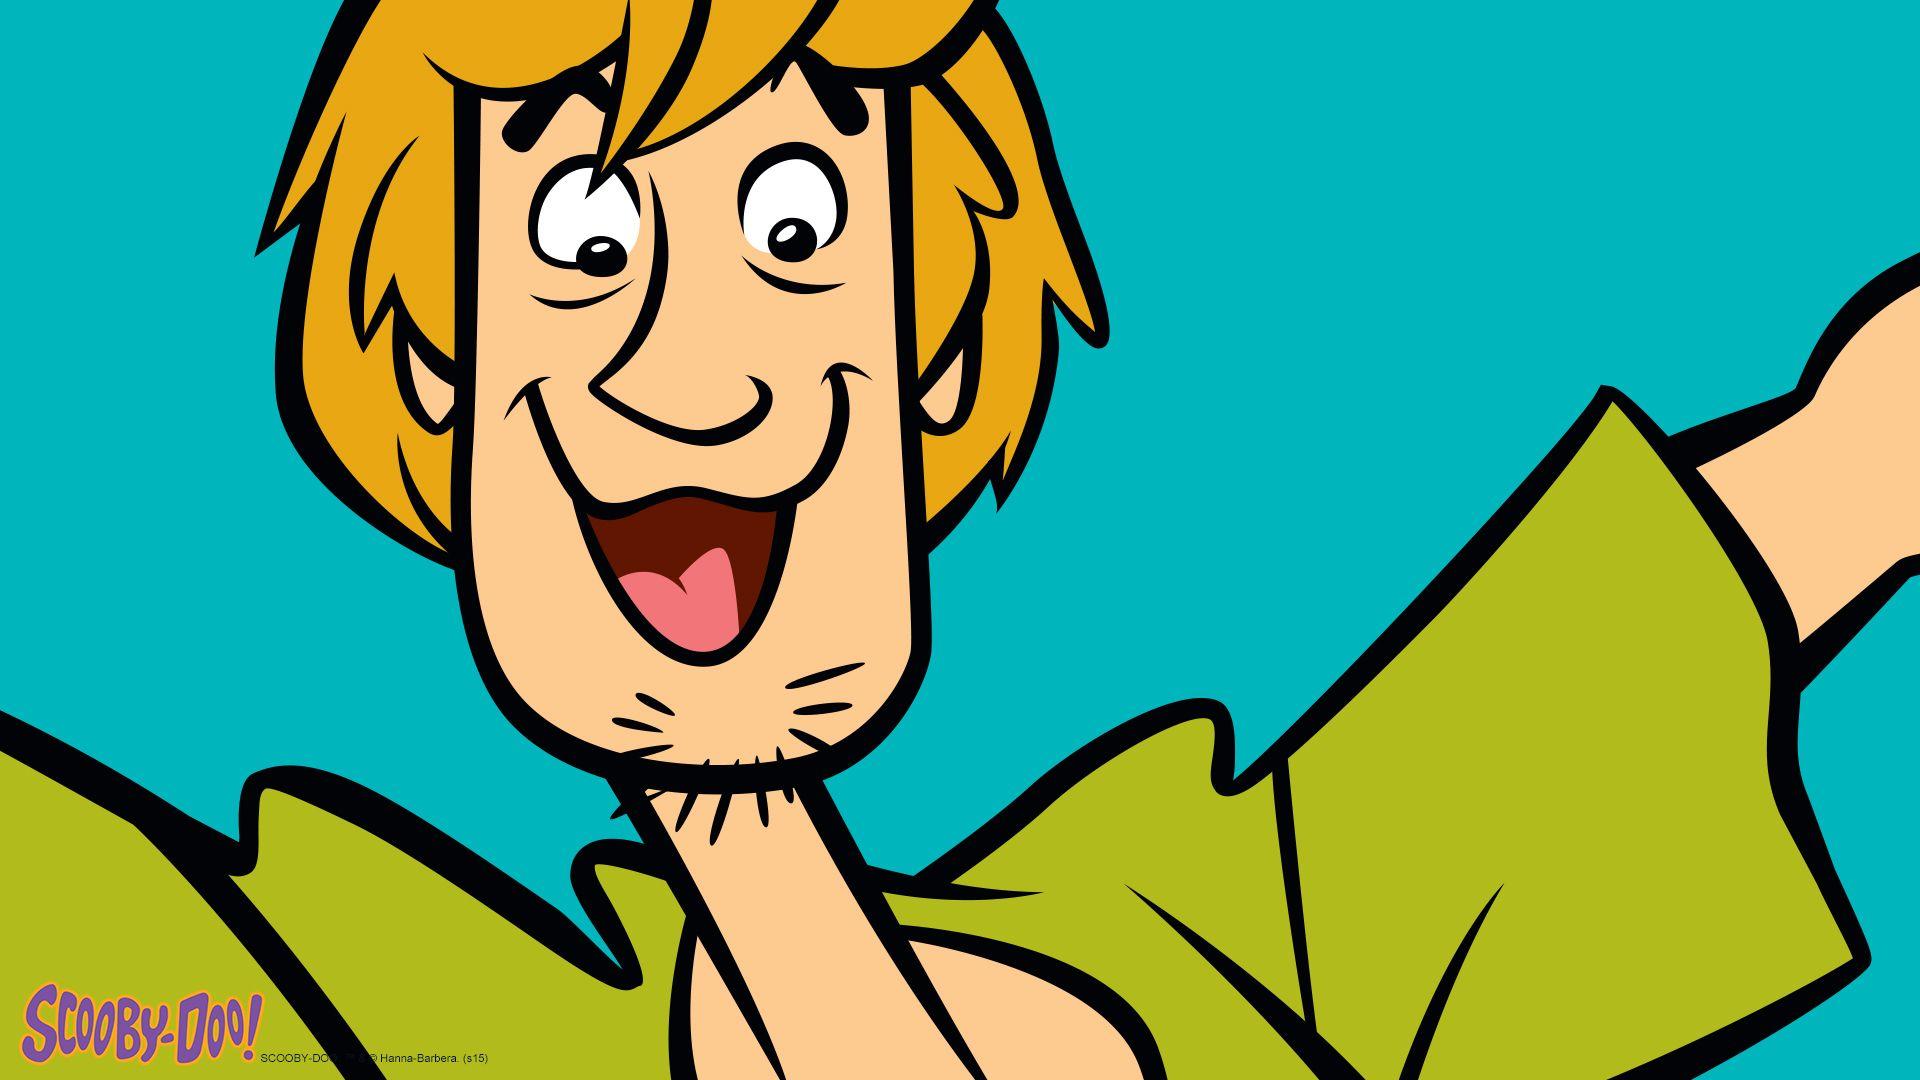 HD wallpaper Shaggy Scooby Doo ScoobyDoo and Shaggy wallpaper Cartoons   Wallpaper Flare